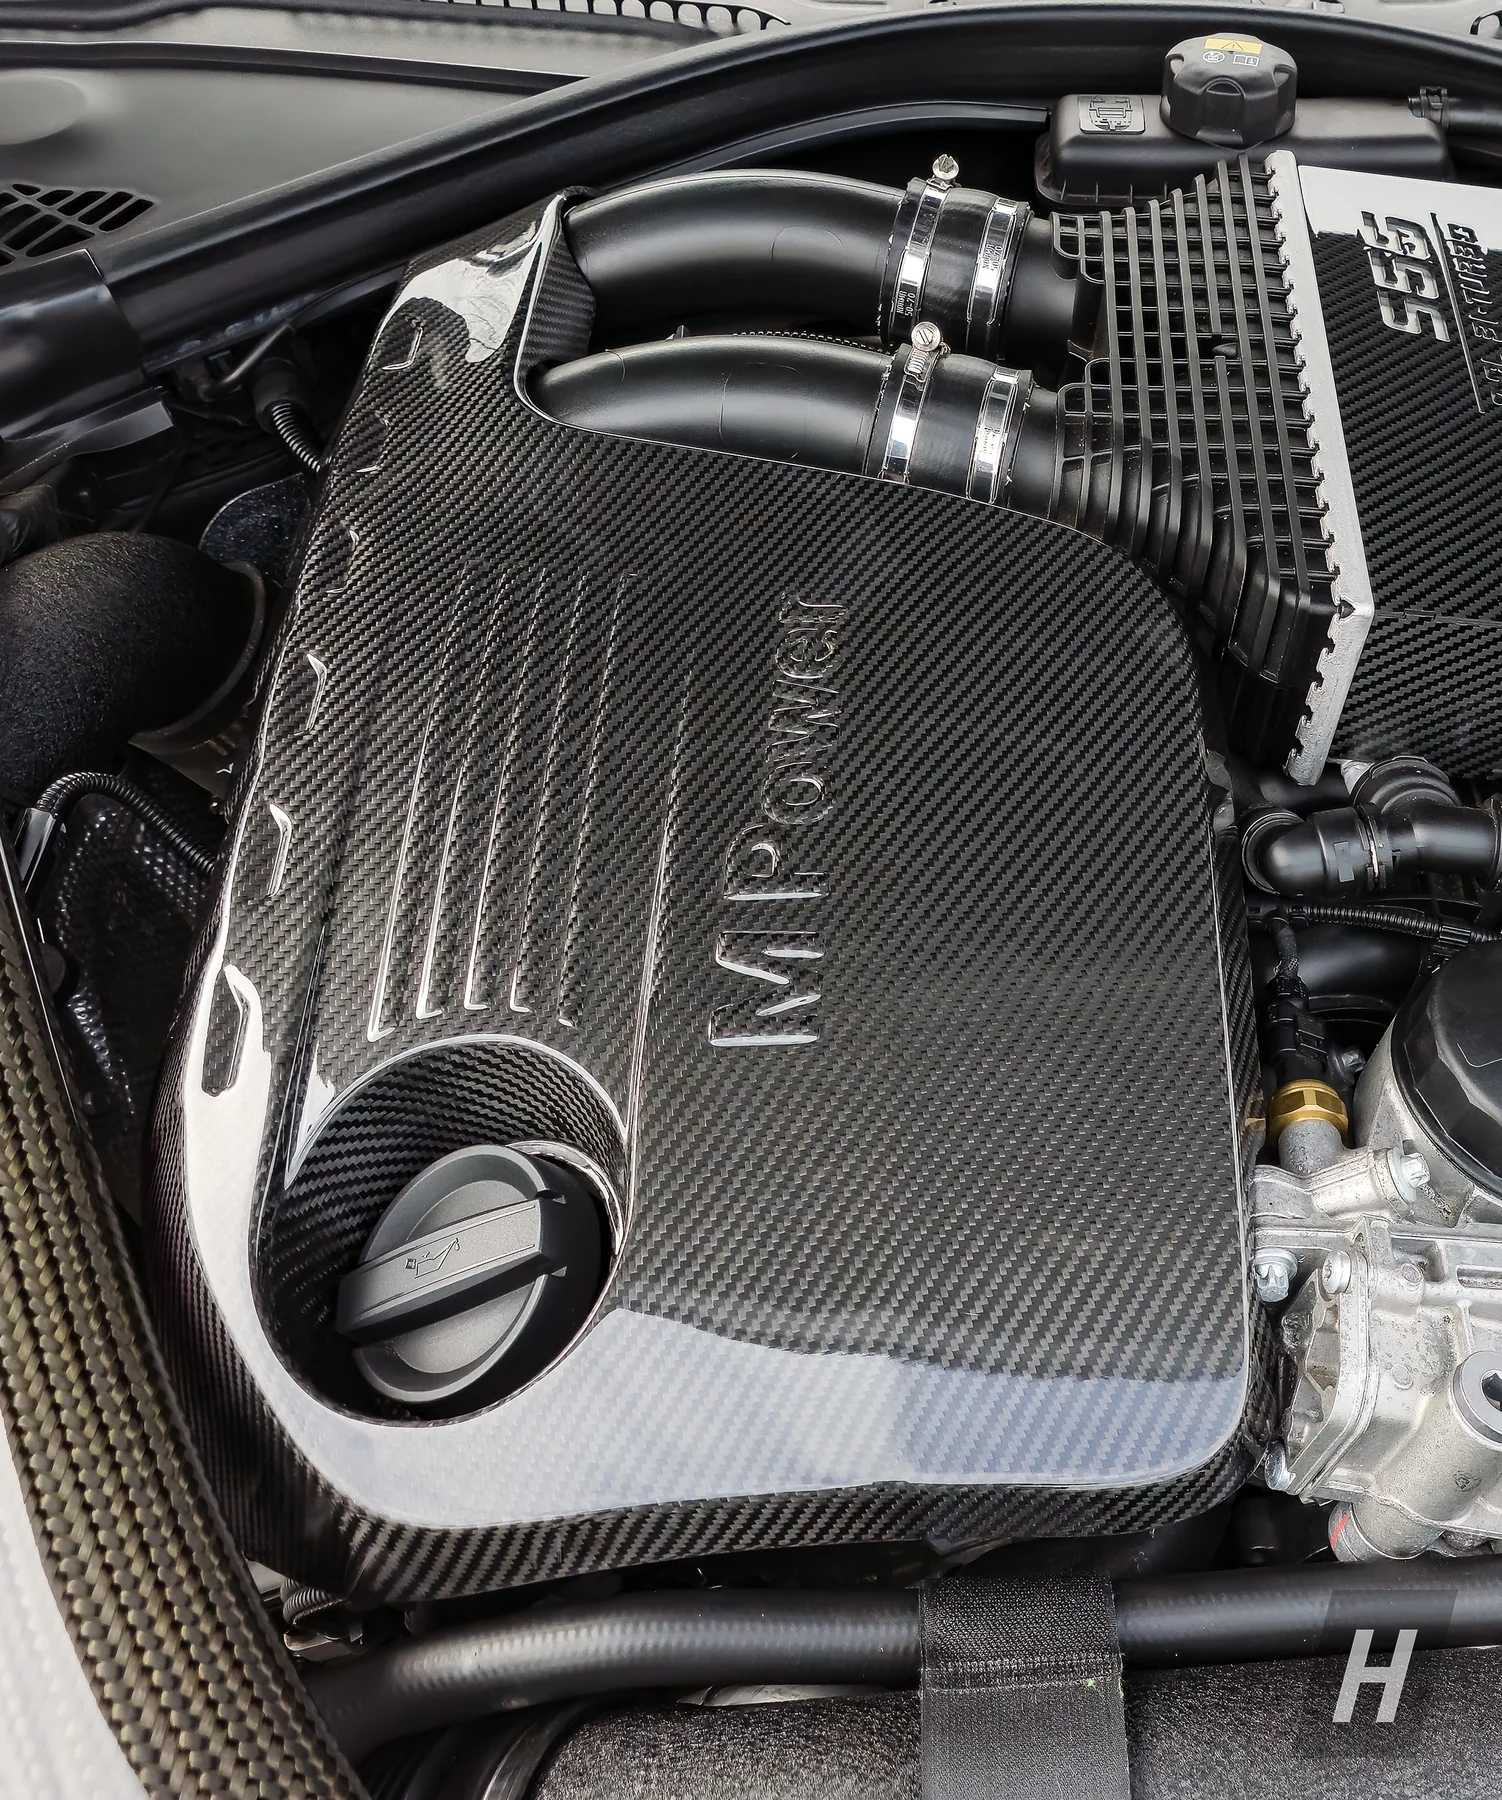 The perfect addition to your BMW engine bay.